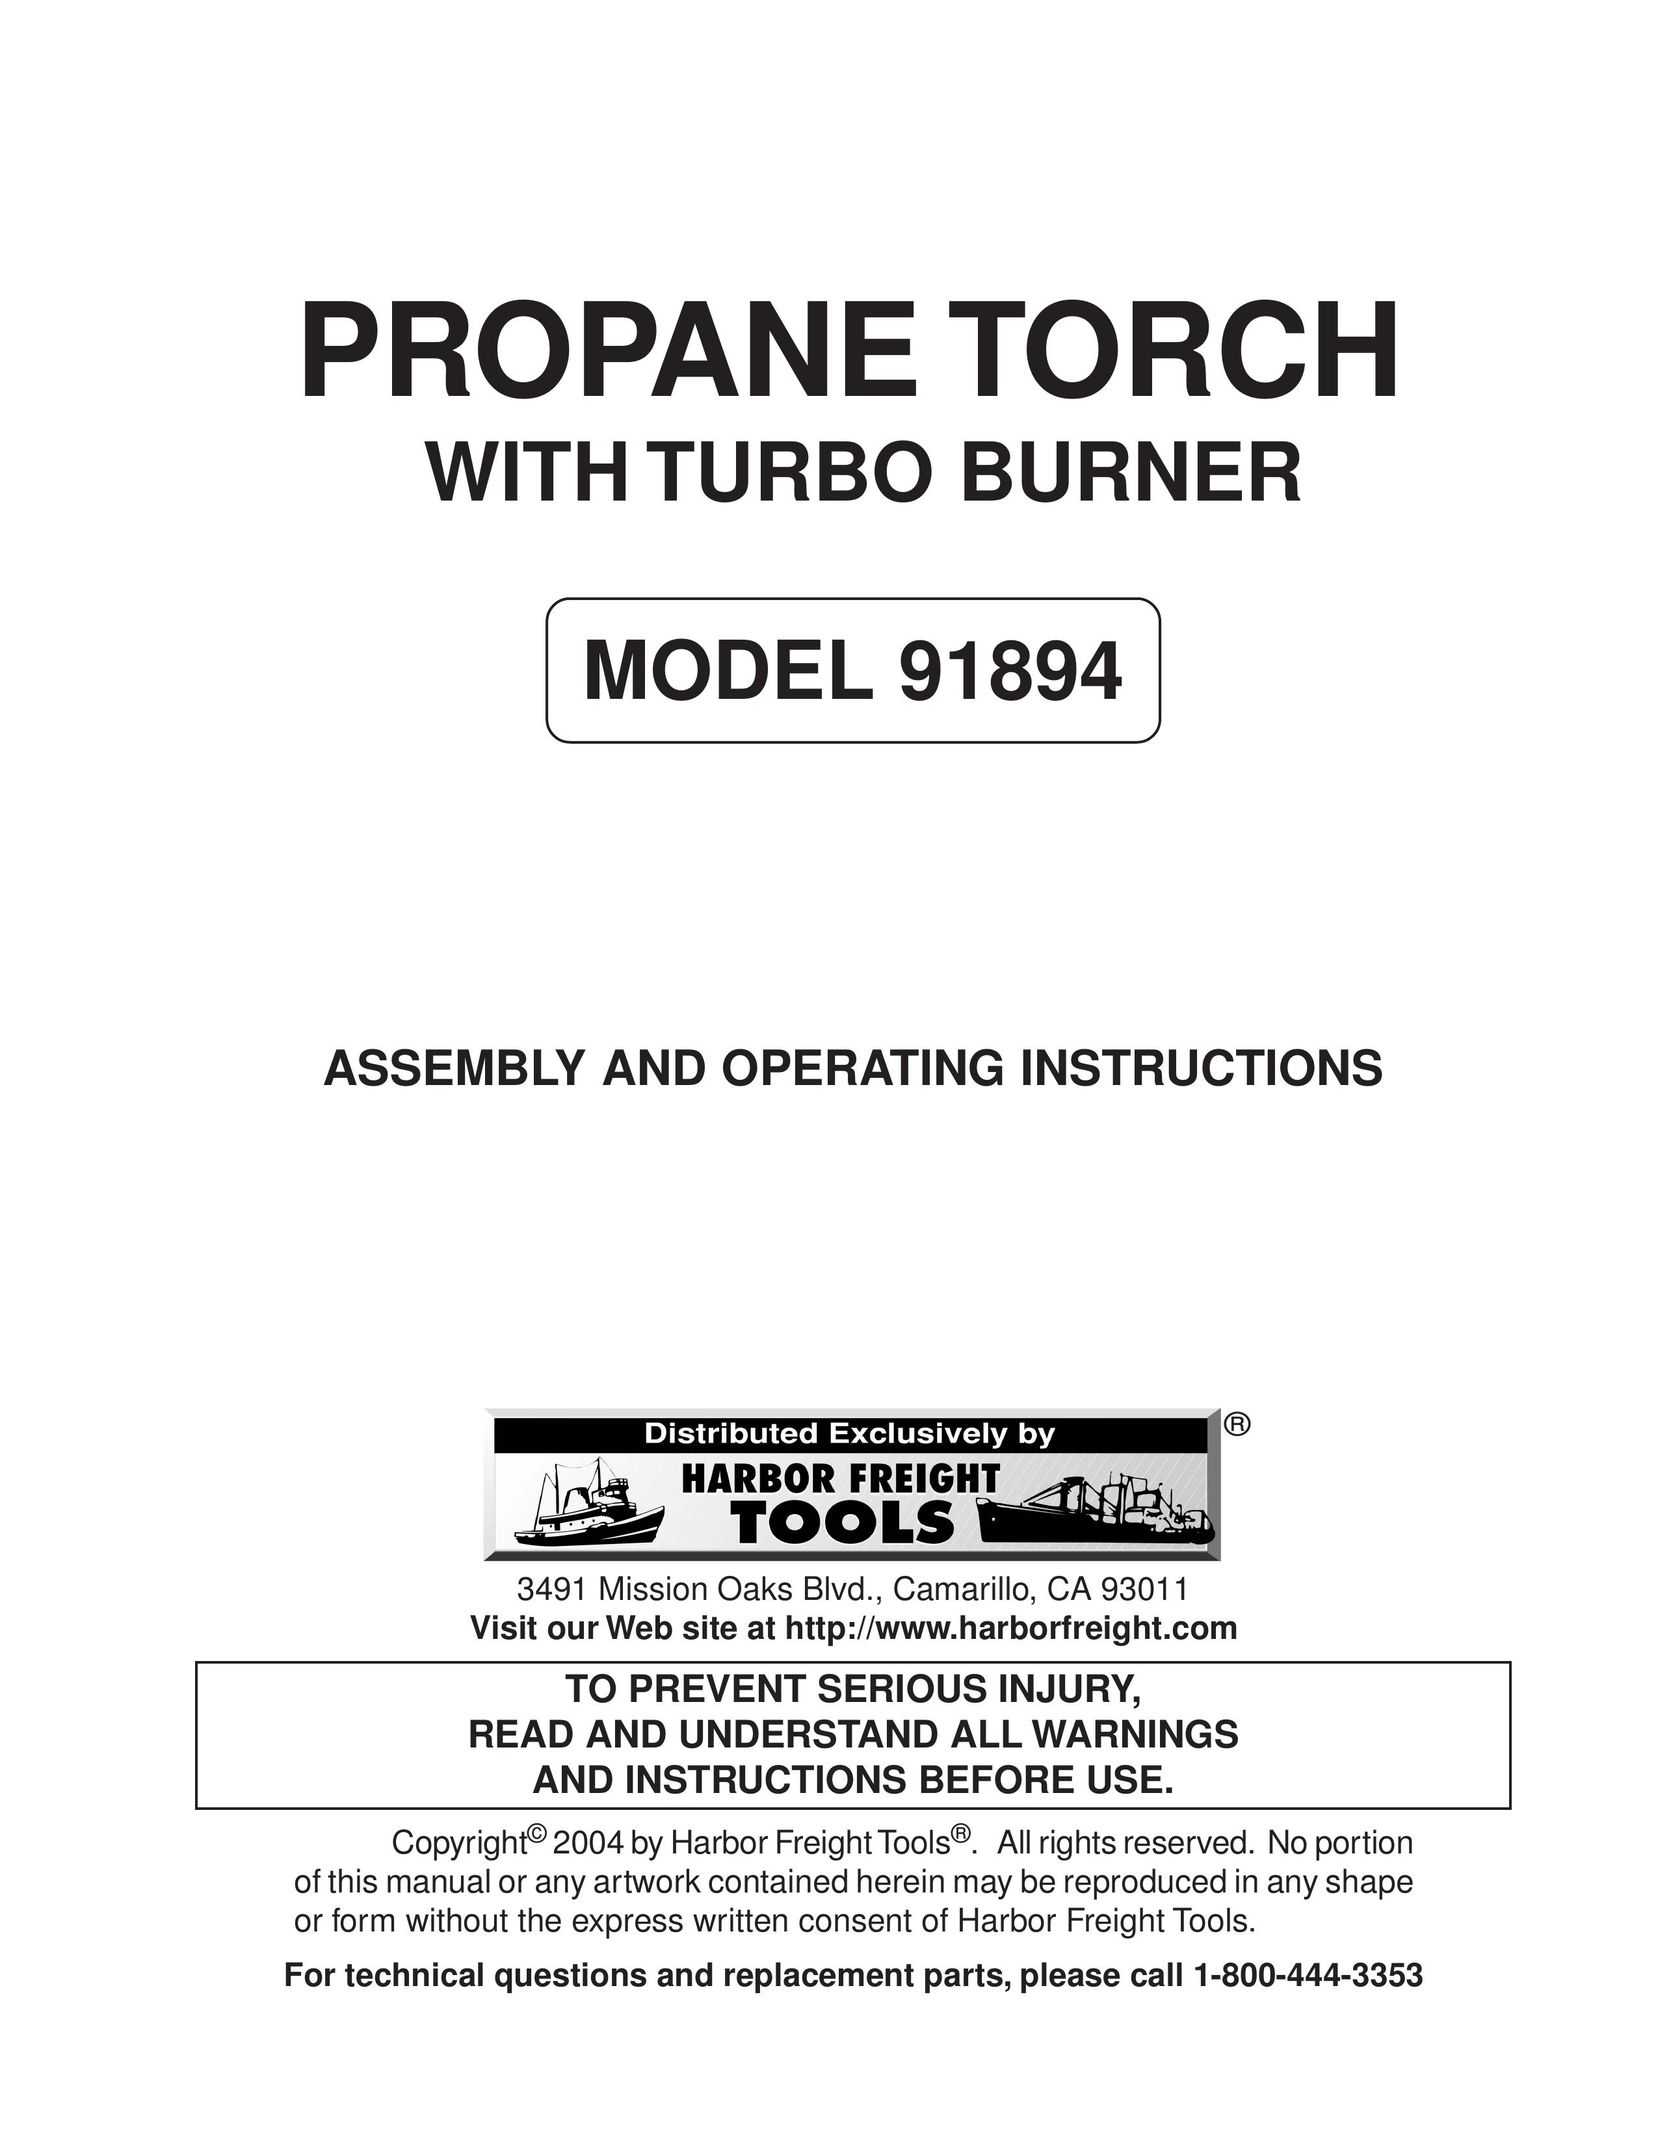 Harbor Freight Tools 91894 Blowtorch User Manual